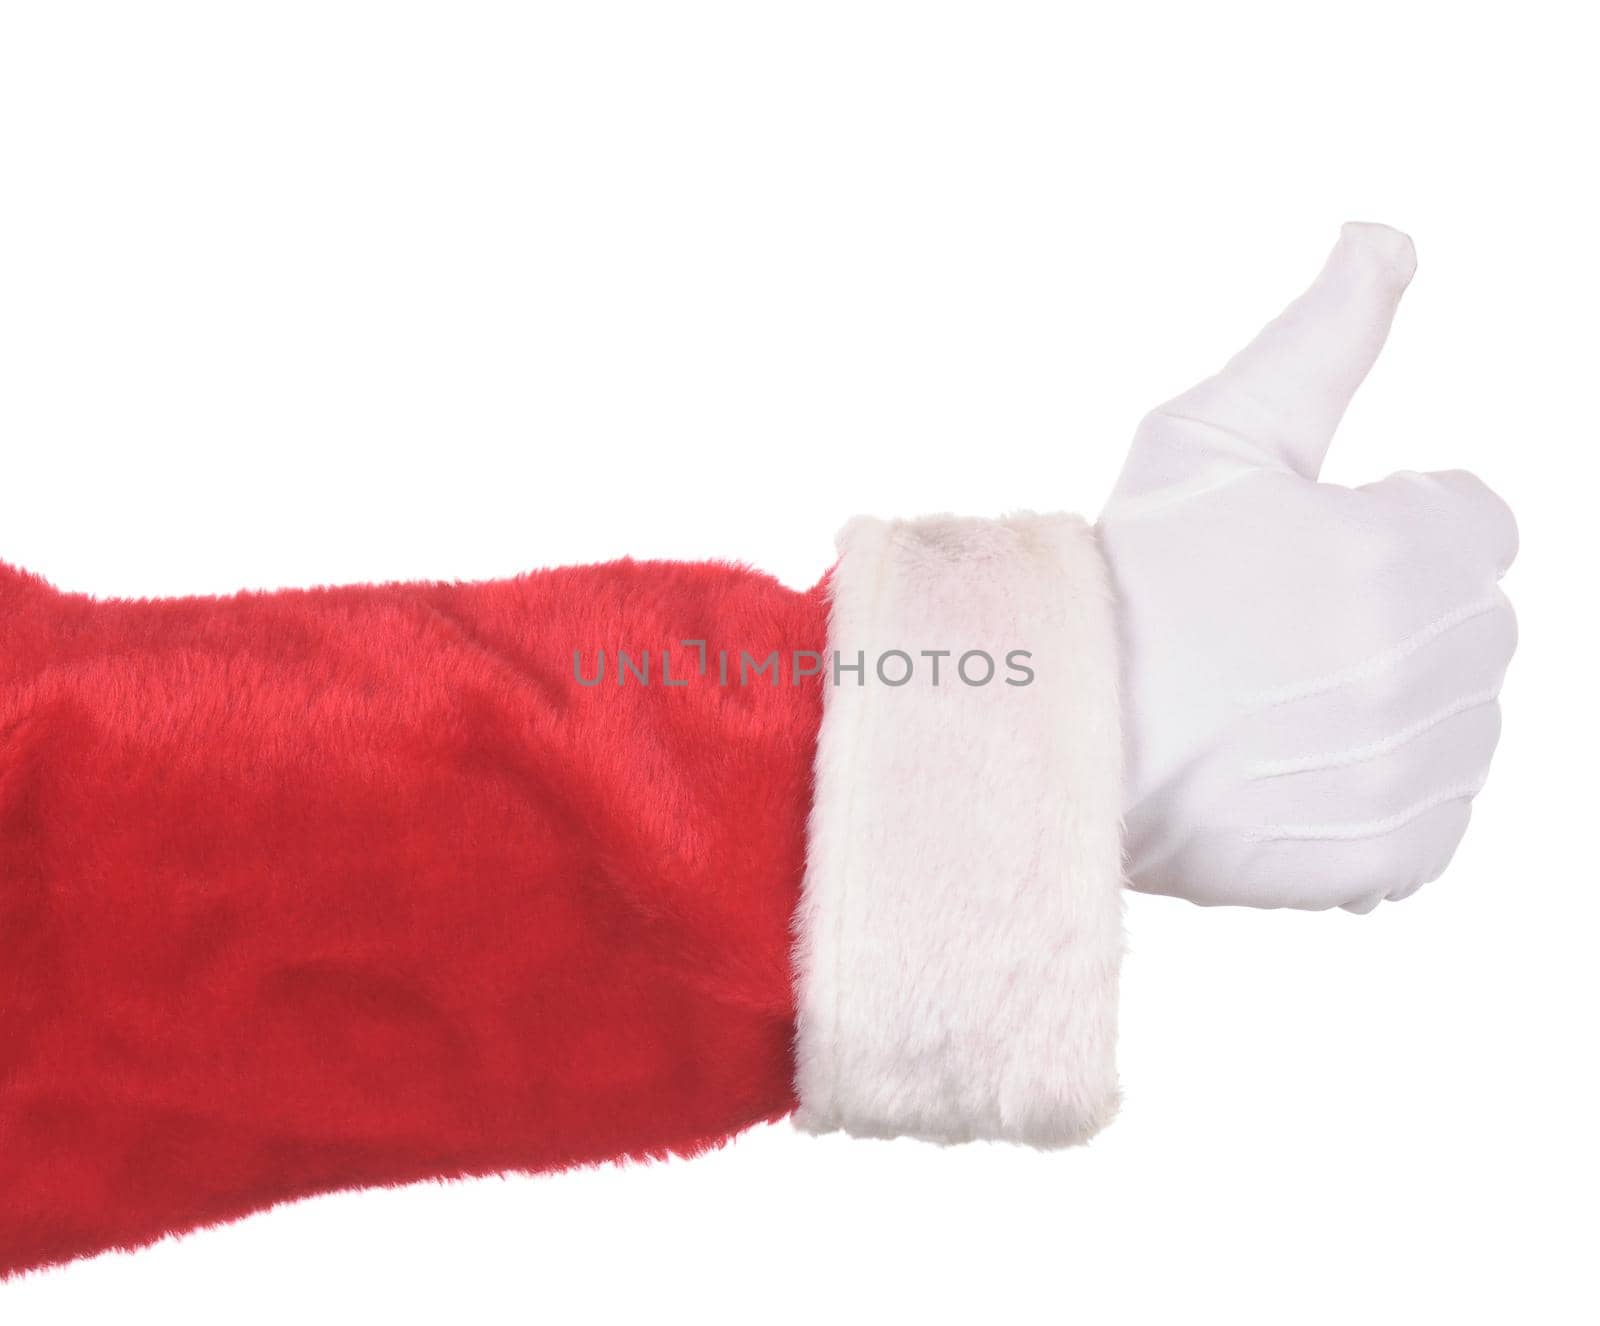 Santa Claus Thumbs Up by sCukrov